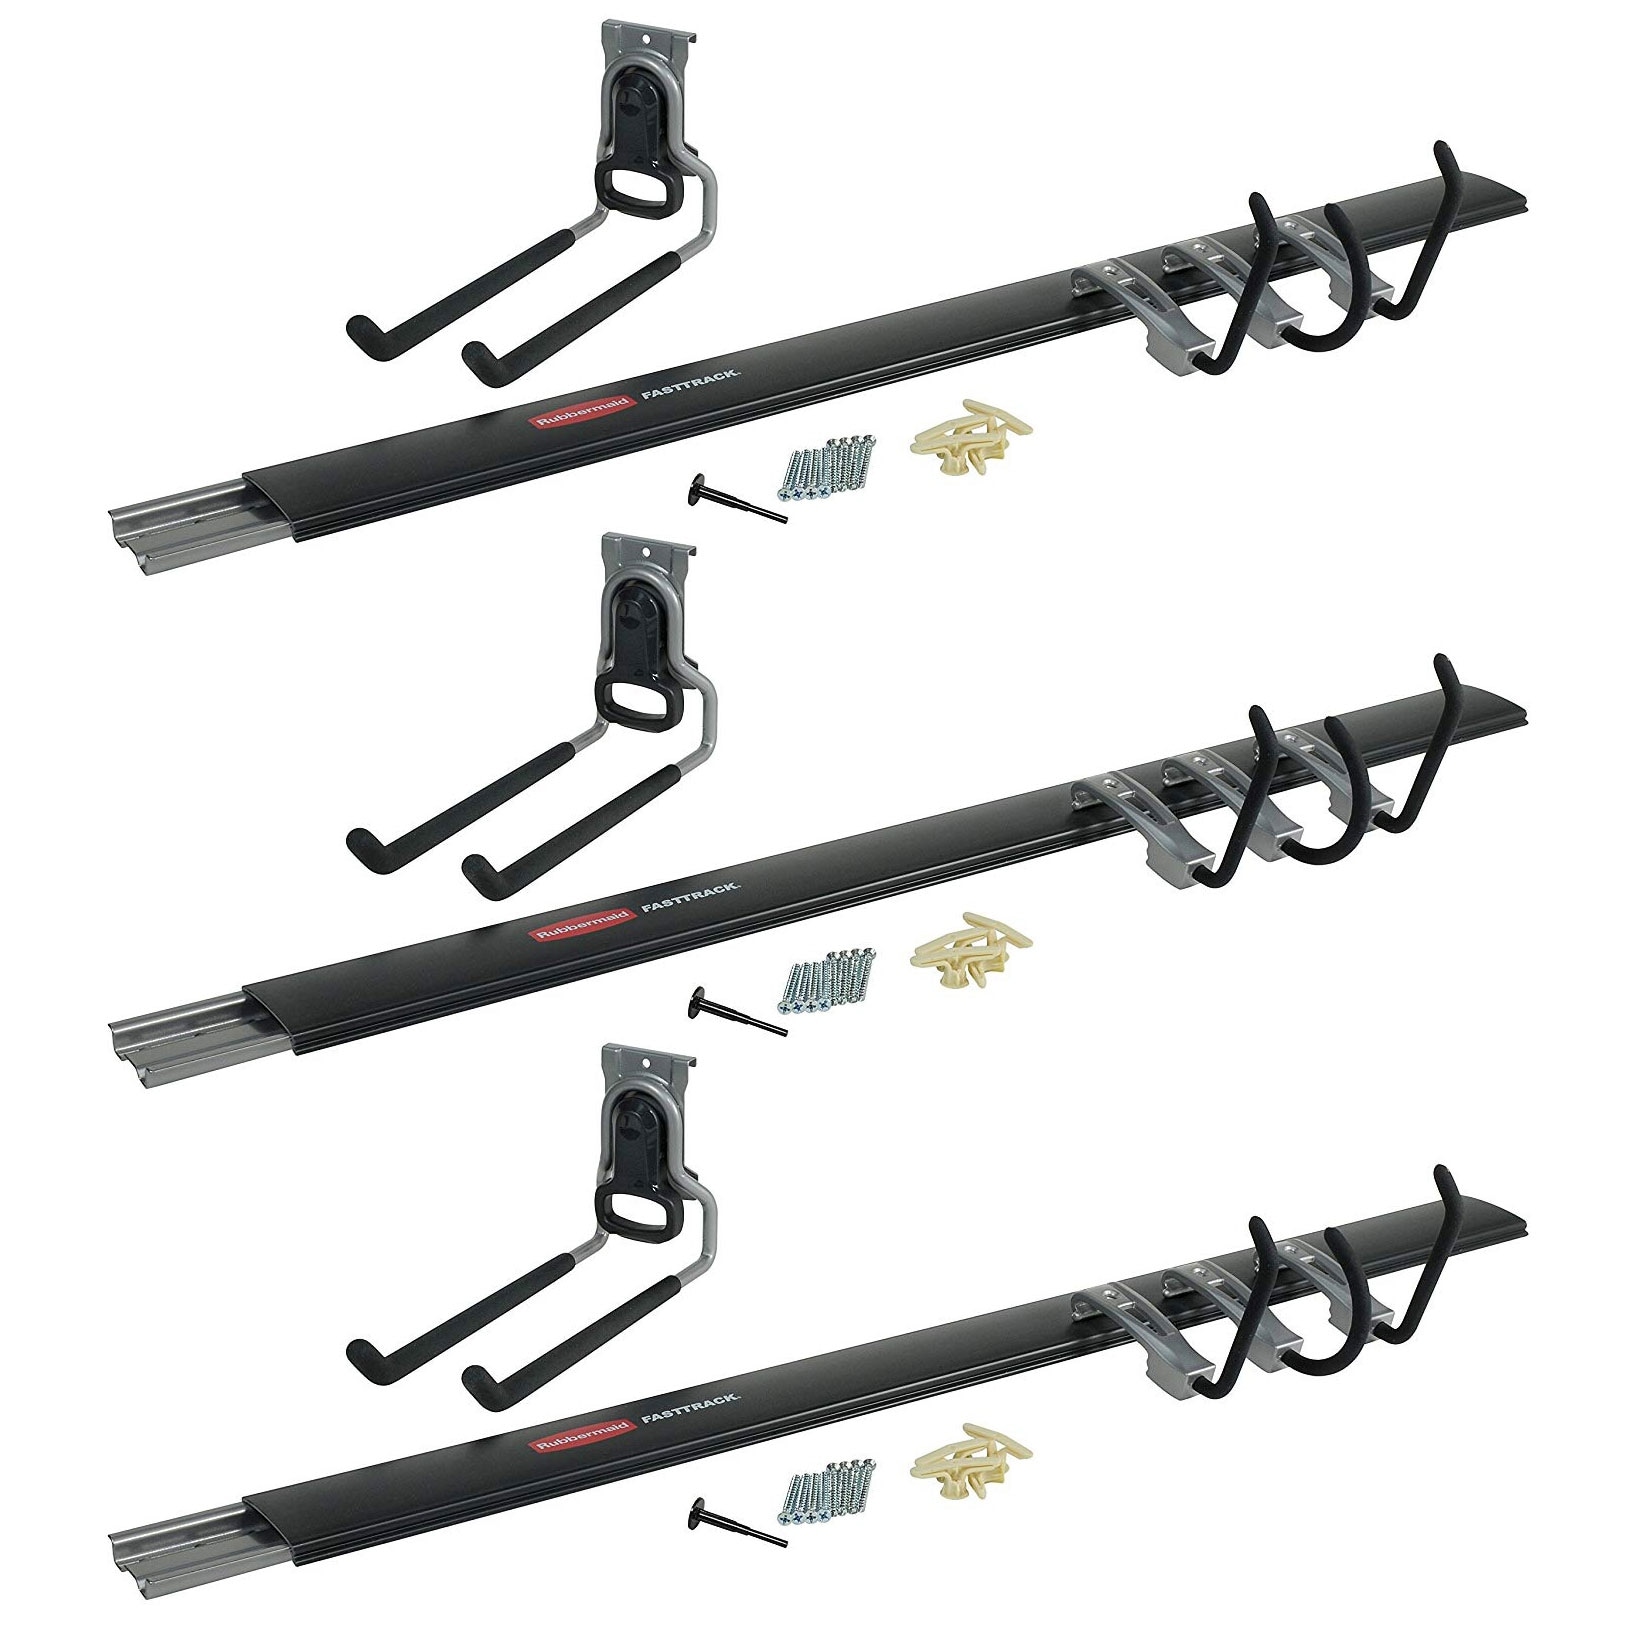 https://ak1.ostkcdn.com/images/products/is/images/direct/b6d0b882126e0c026bf476adcd8f6c6f8b2be4c1/Rubbermaid-FastTrack-Garage-5-Piece-Rail-and-Hook-Kit-Storage-System-%283-Pack%29.jpg